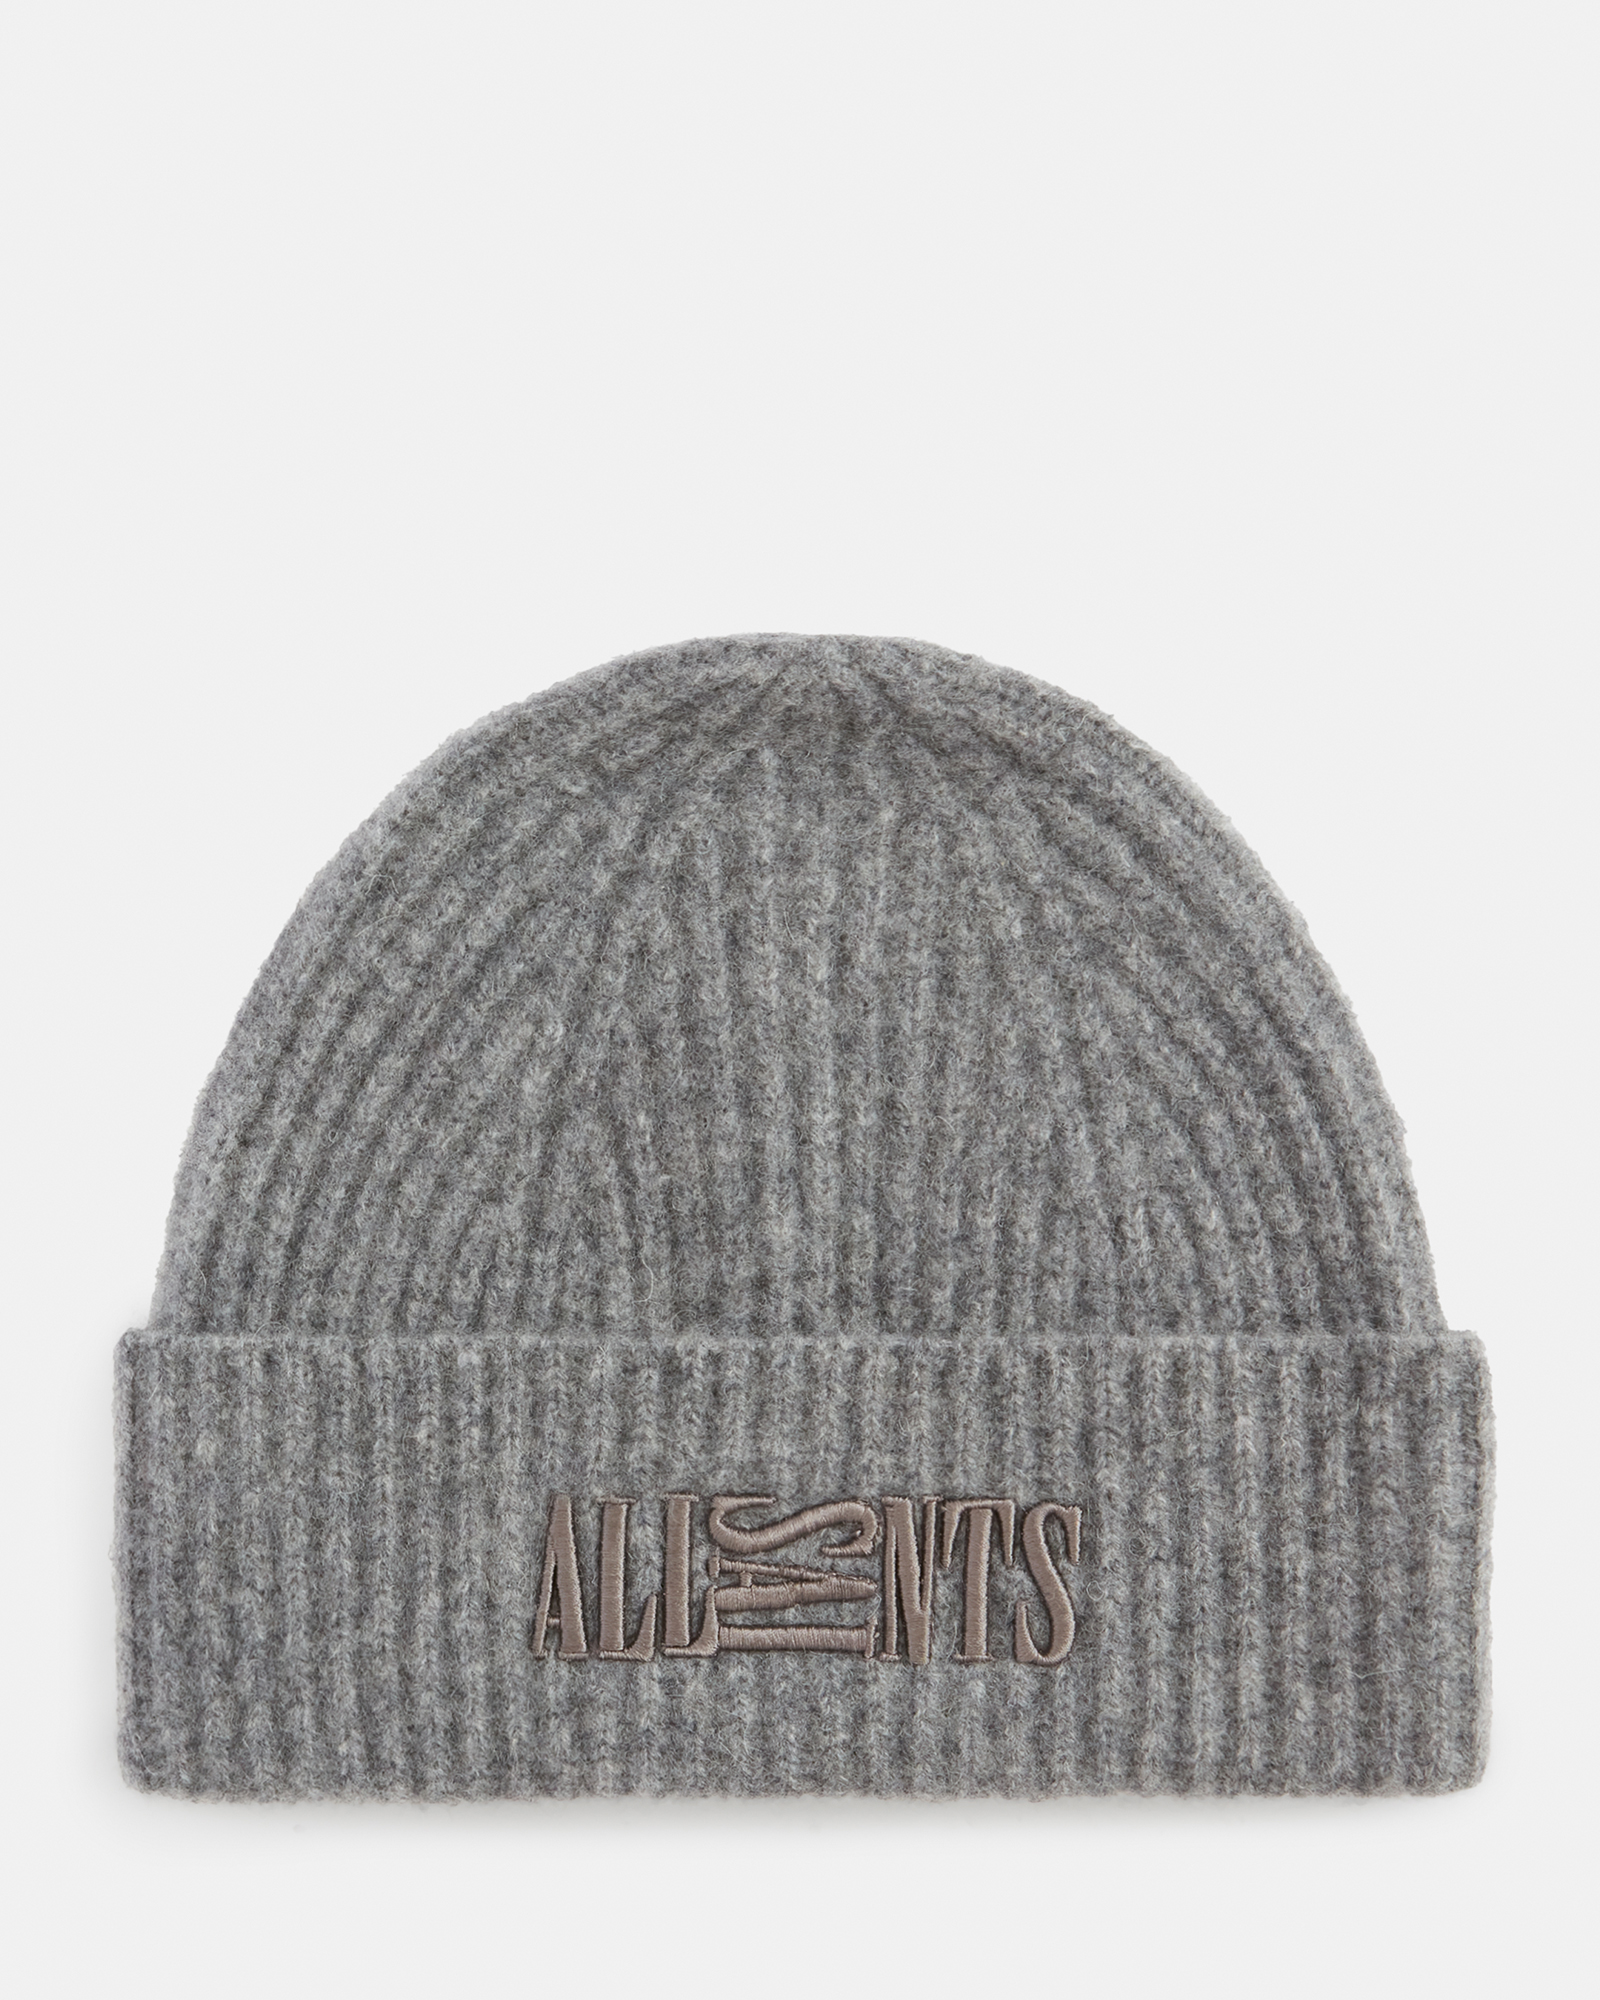 Oppose Boiled Wool Embroidered Beanie Grey Marl | ALLSAINTS US | Beanies